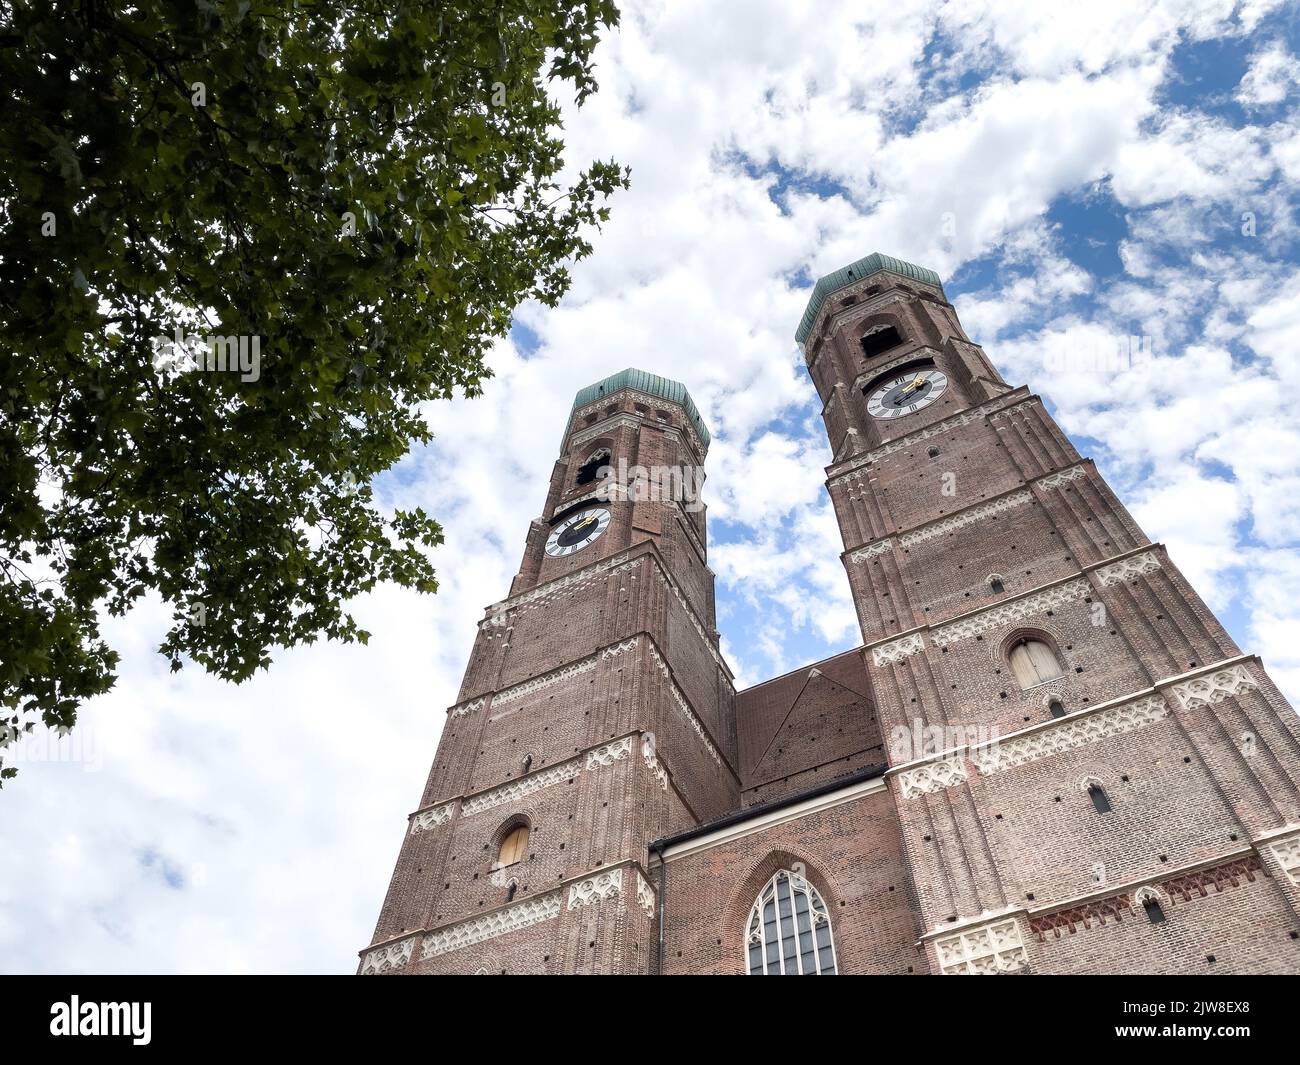 Frauenkirche Cathedral in the center of Munich, Germany Stock Photo